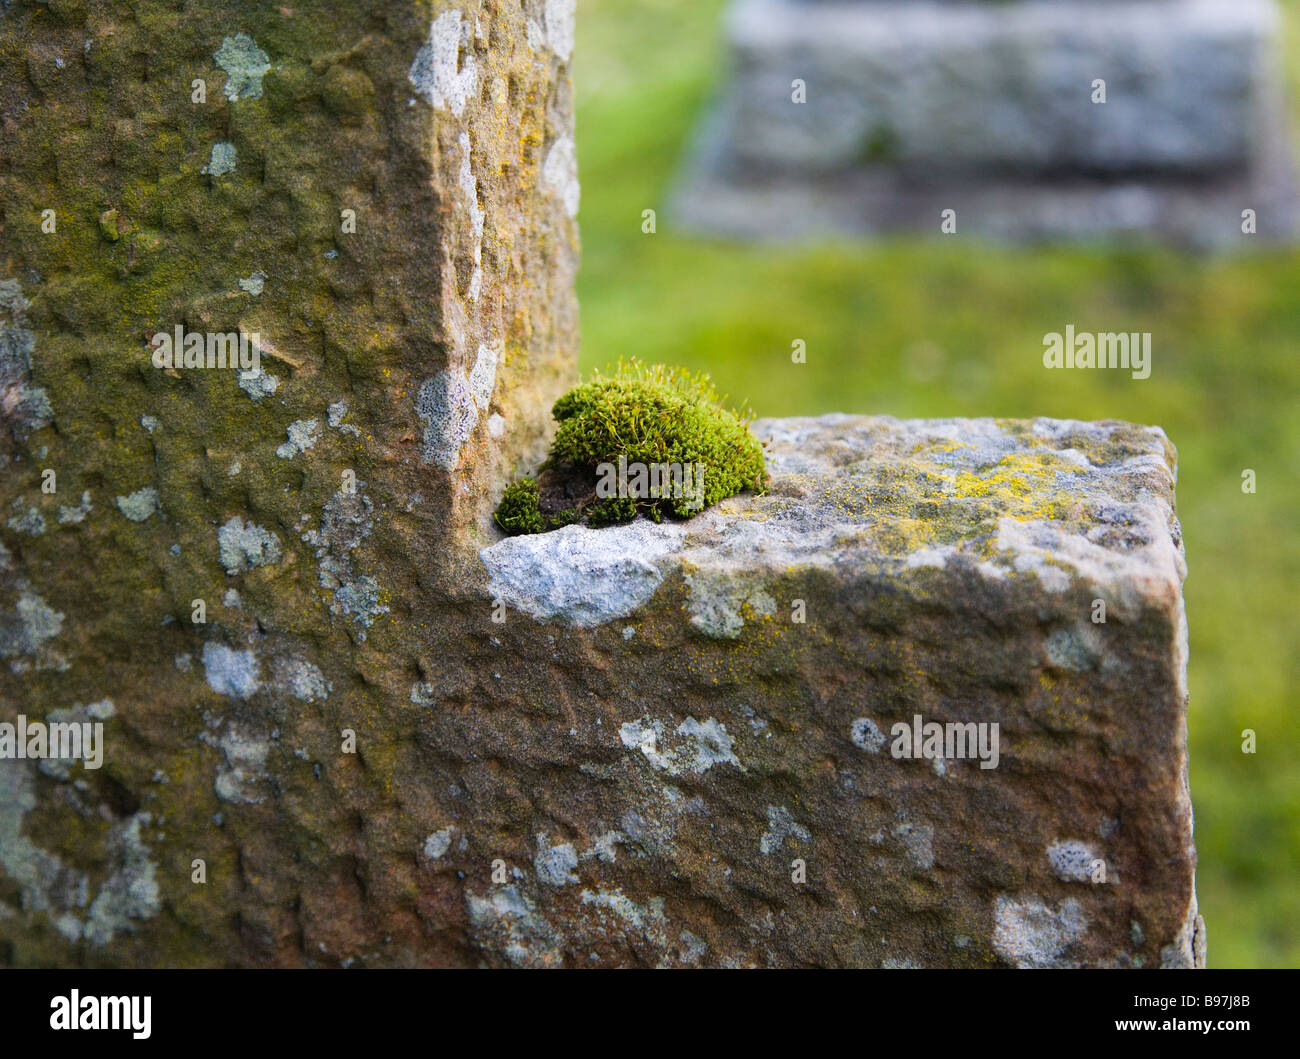 Moss and lichen growing on an old stone cross in a graveyard. Stock Photo